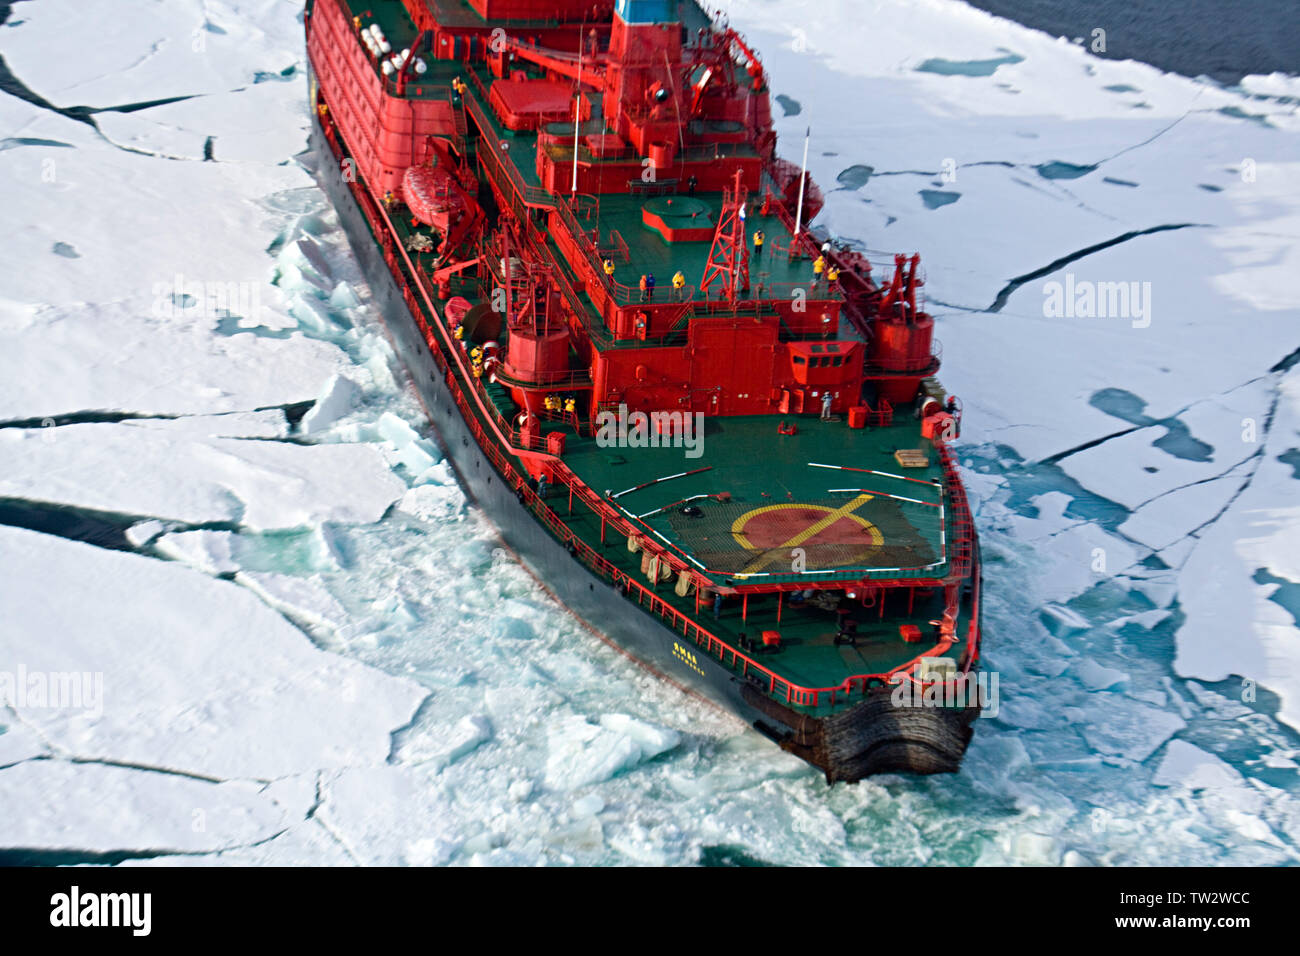 Arktika-class nuclear icebreaker, Yamal, chartered by Quark Expeditions for trip to North Pole. Aerial view of ship in sea ice. Stock Photo